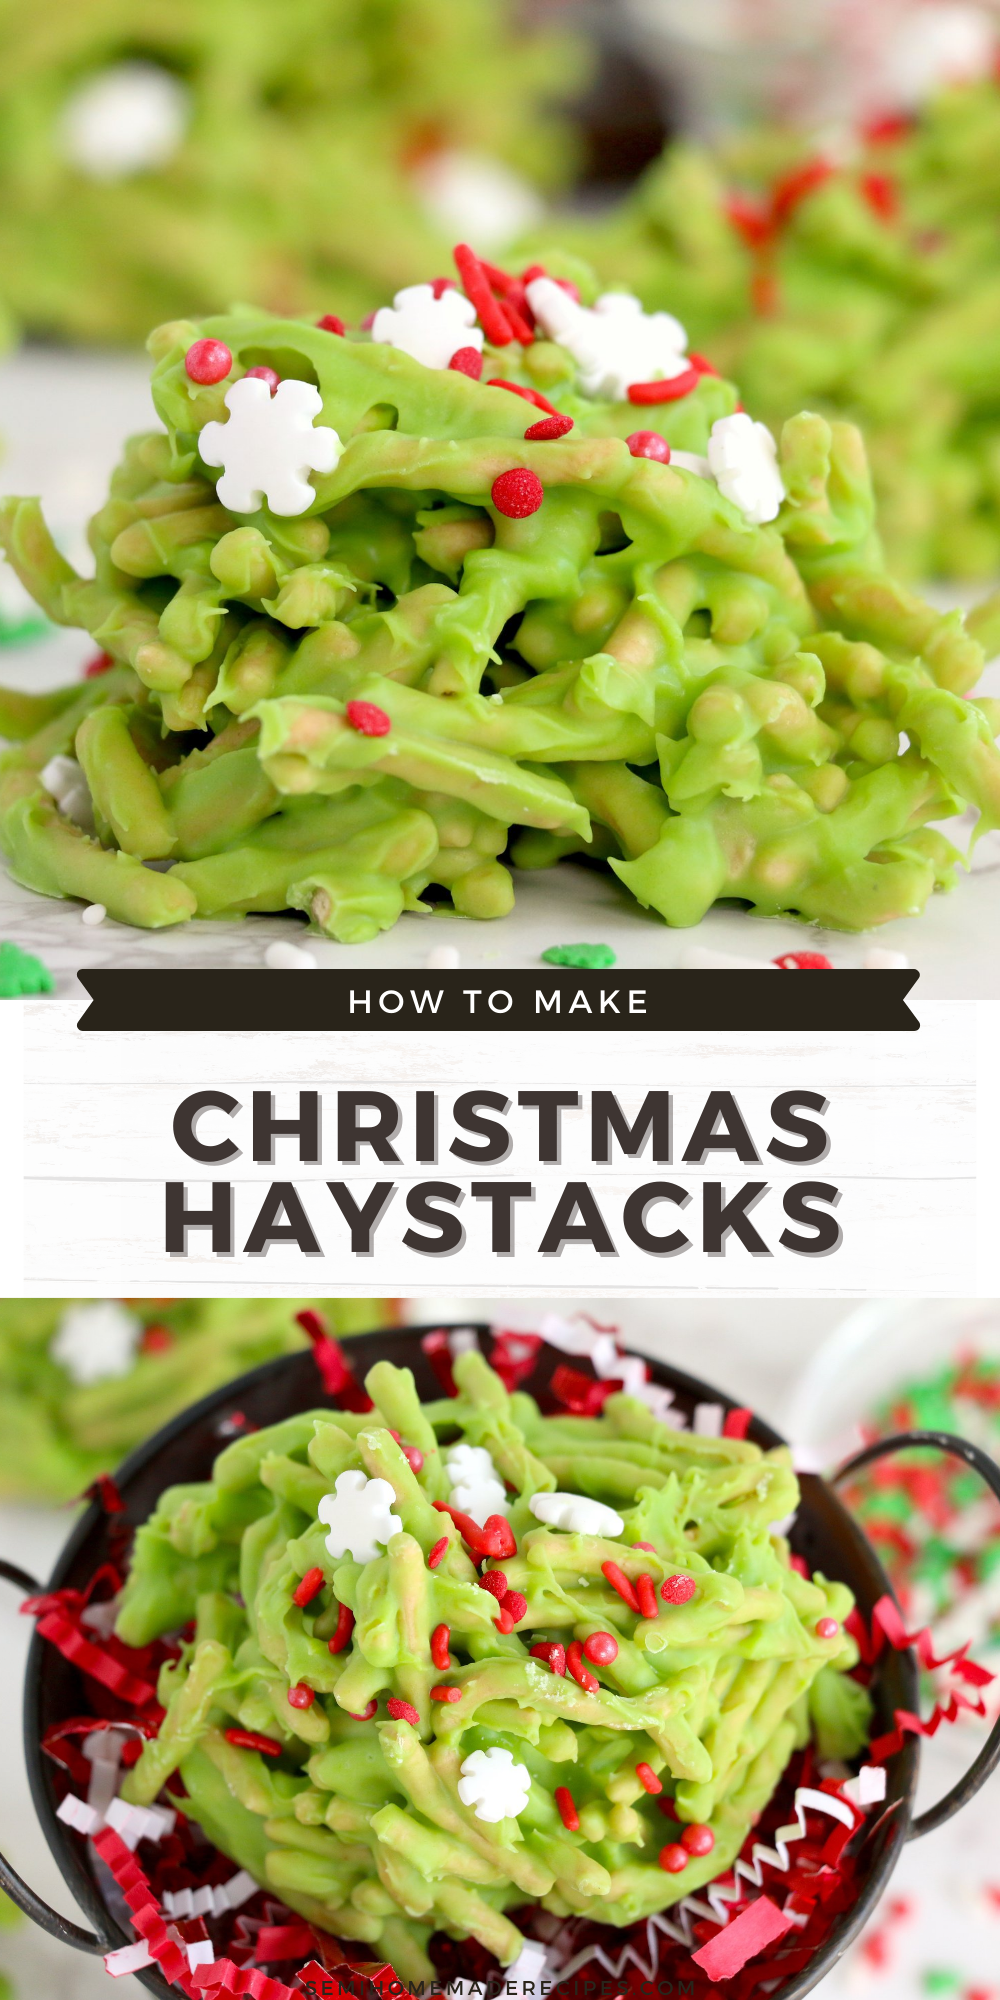 Christmas Haystacks Candy is an old fashioned vintage candy that people around here have been making for decades. This festive and easy Christmas dessert combines chow mein noodles, white chocolate and green coloring together with holiday sprinkles for a super cute treat.
